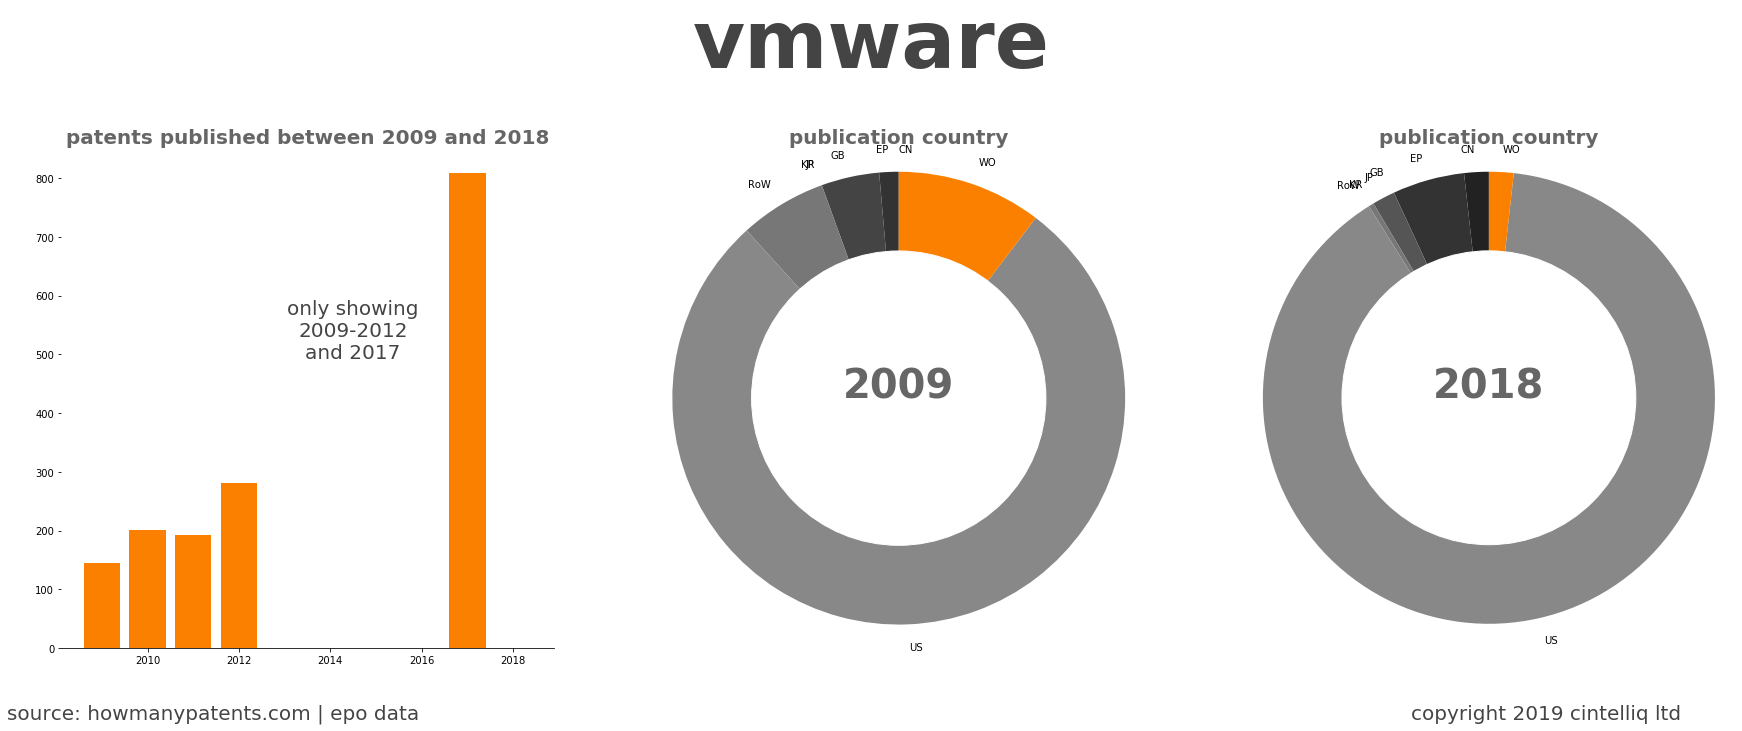 summary of patents for Vmware